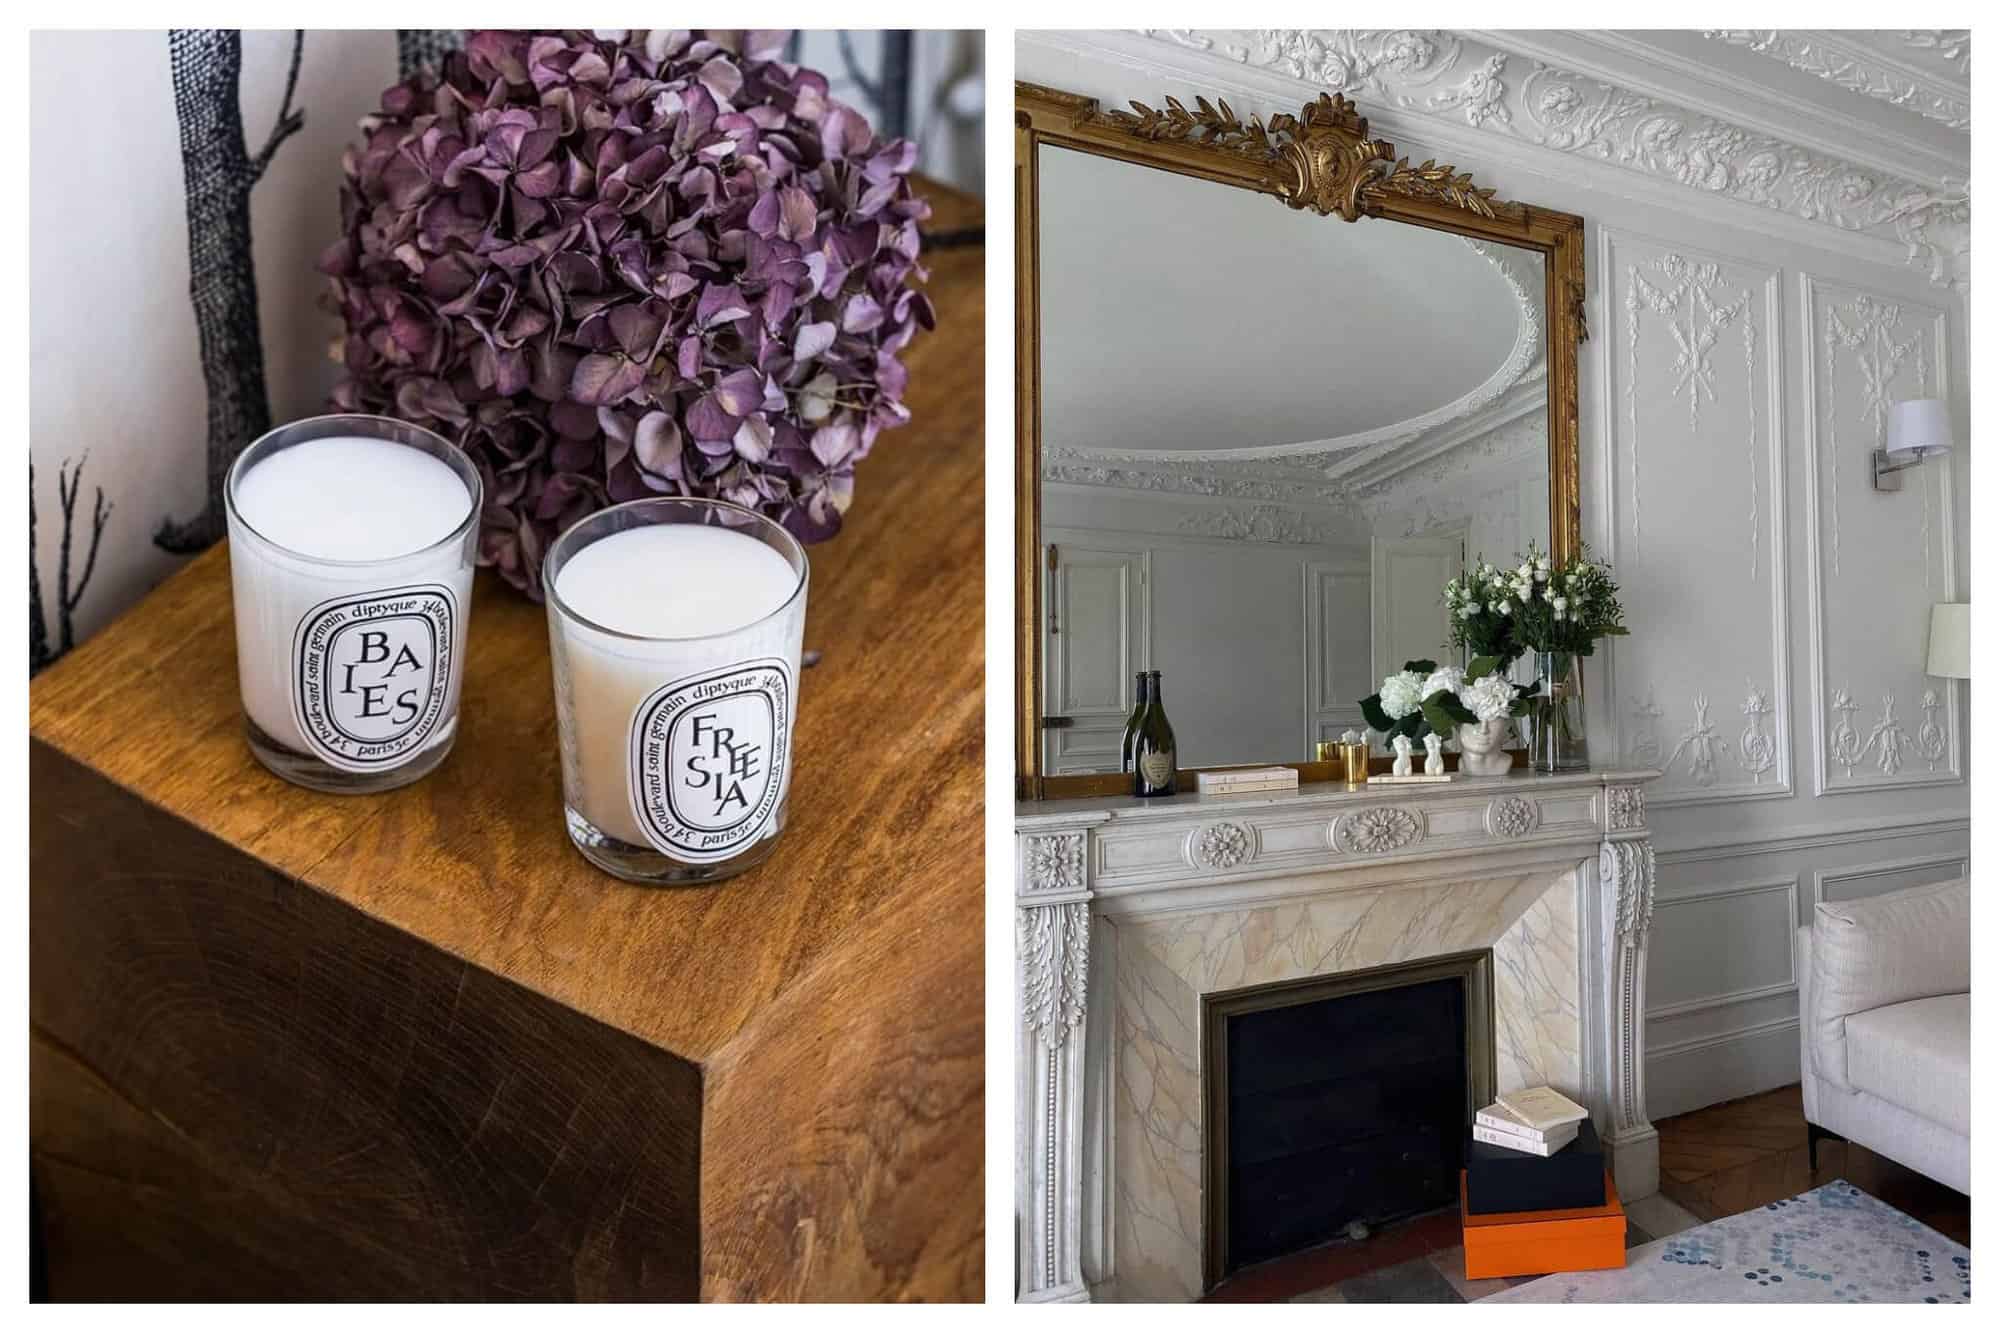 Left: Two diptyque candles (Baies and Freesia) are pictured on a wooden surface next to some dried purple flowers. Right: A marble fireplace within a white room is pictured, with some flowers and candles resting on the mantelpiece and a large gold mirror behind that. 